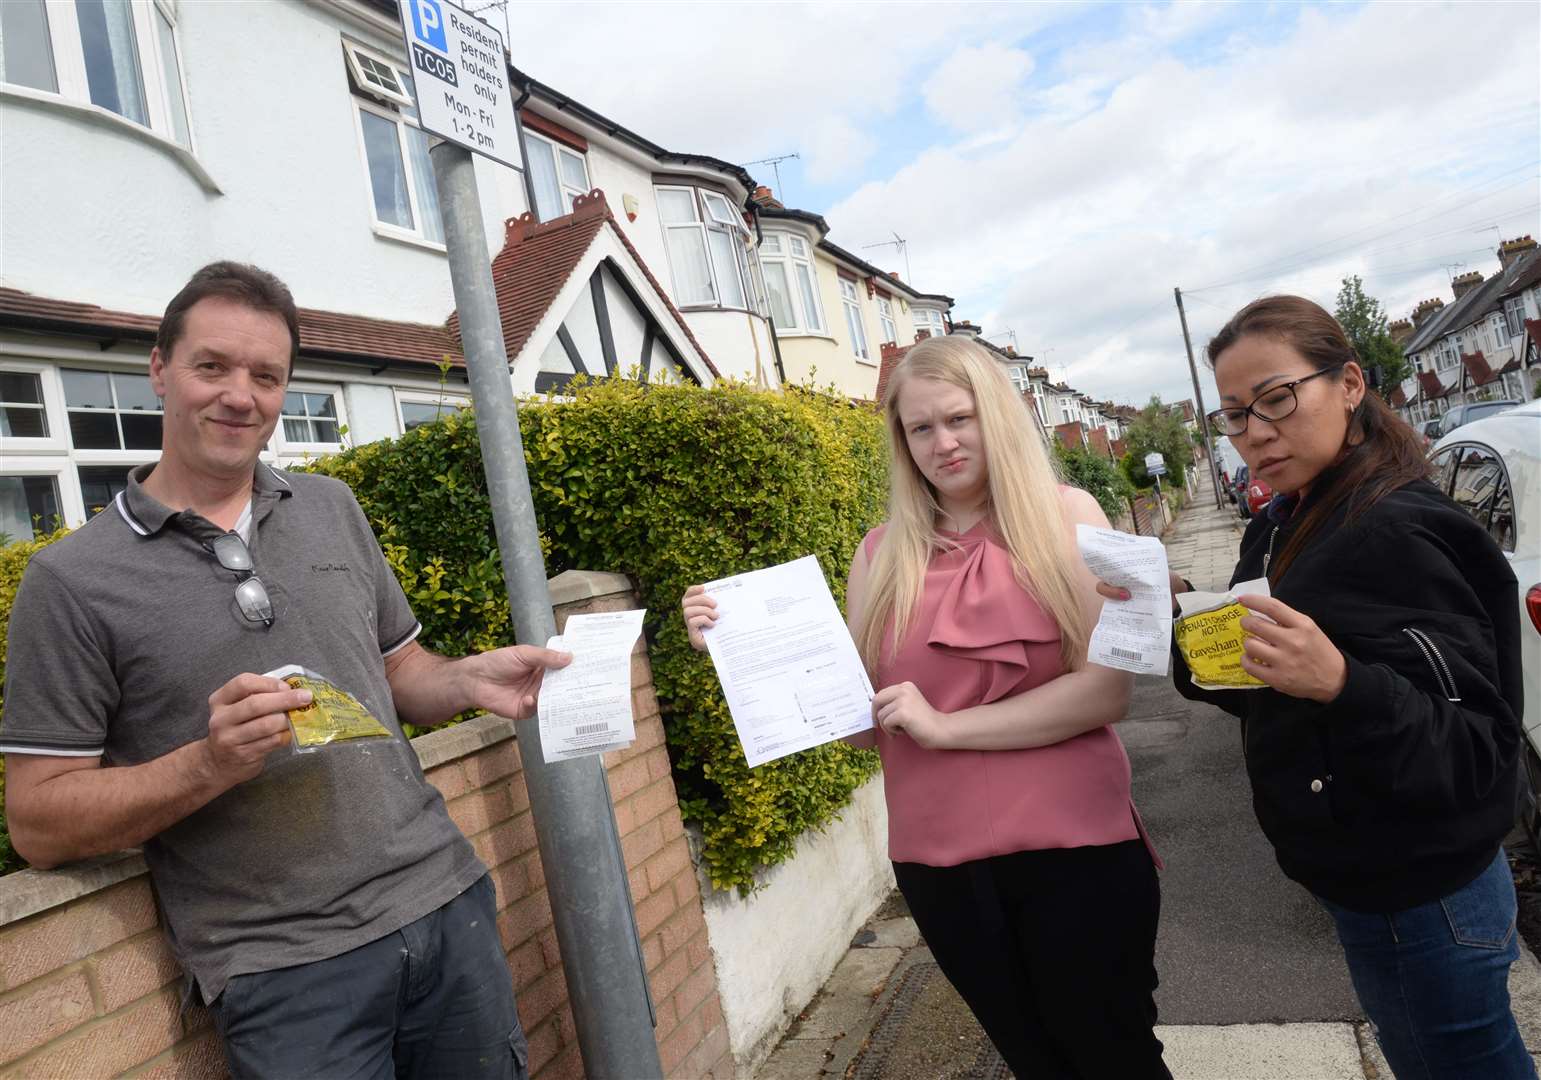 Mark Bruce, Sarah Cox and Somphon Bates are angry about new parking restrictions